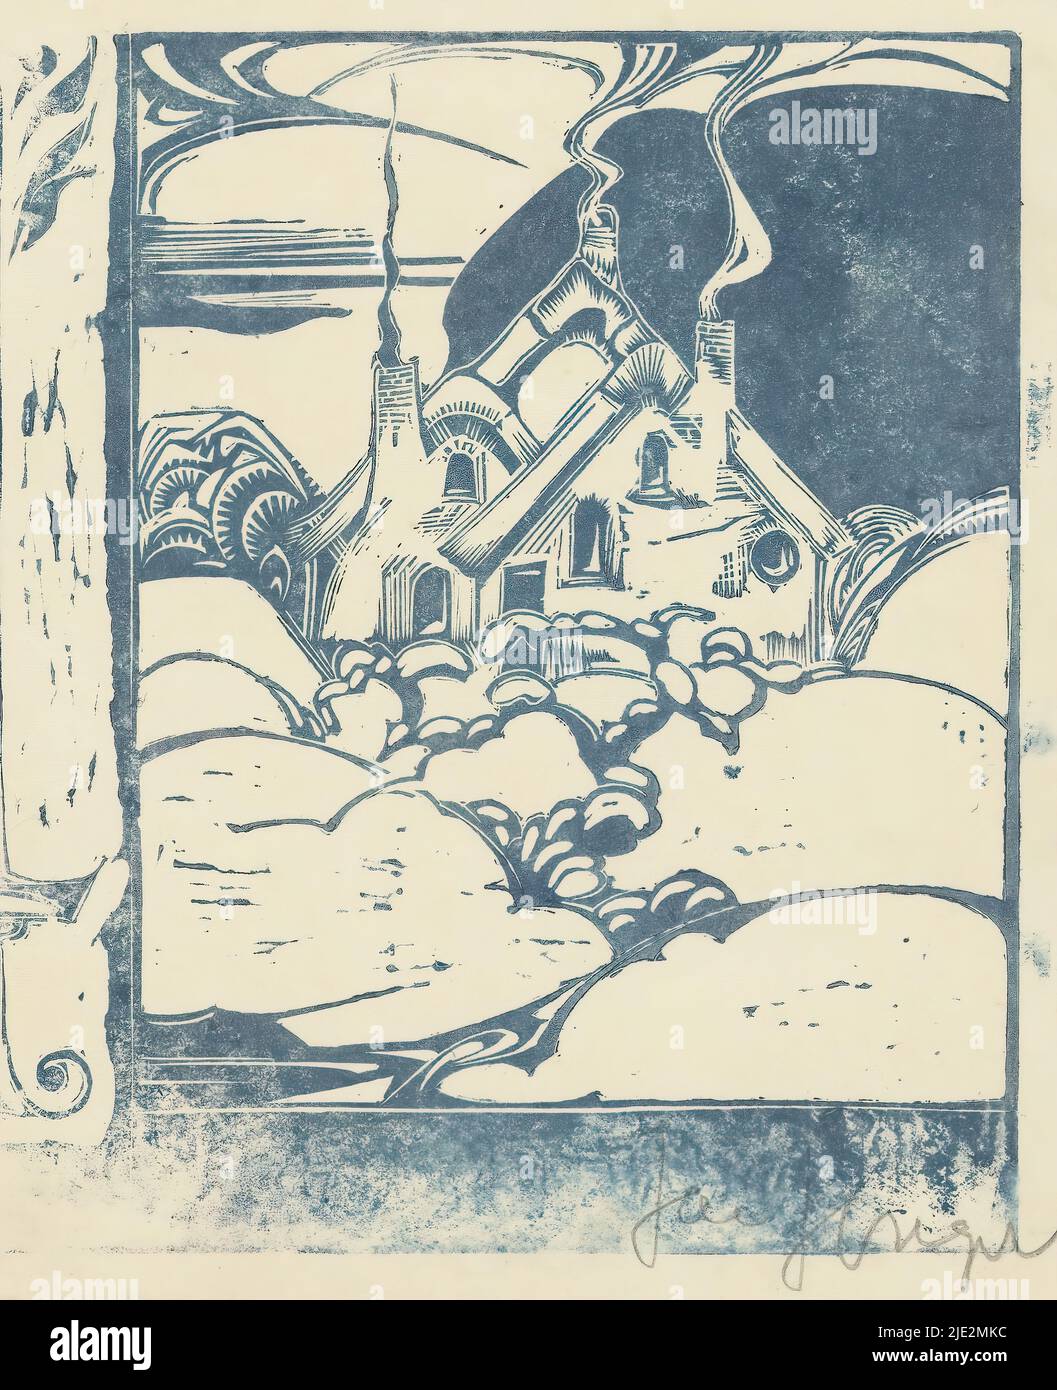 House with smoking chimneys in hilly landscape, print maker: Jac Jongert, (signed by artist), 1893 - 1942, paper, height 198 mm × width 140 mm Stock Photo